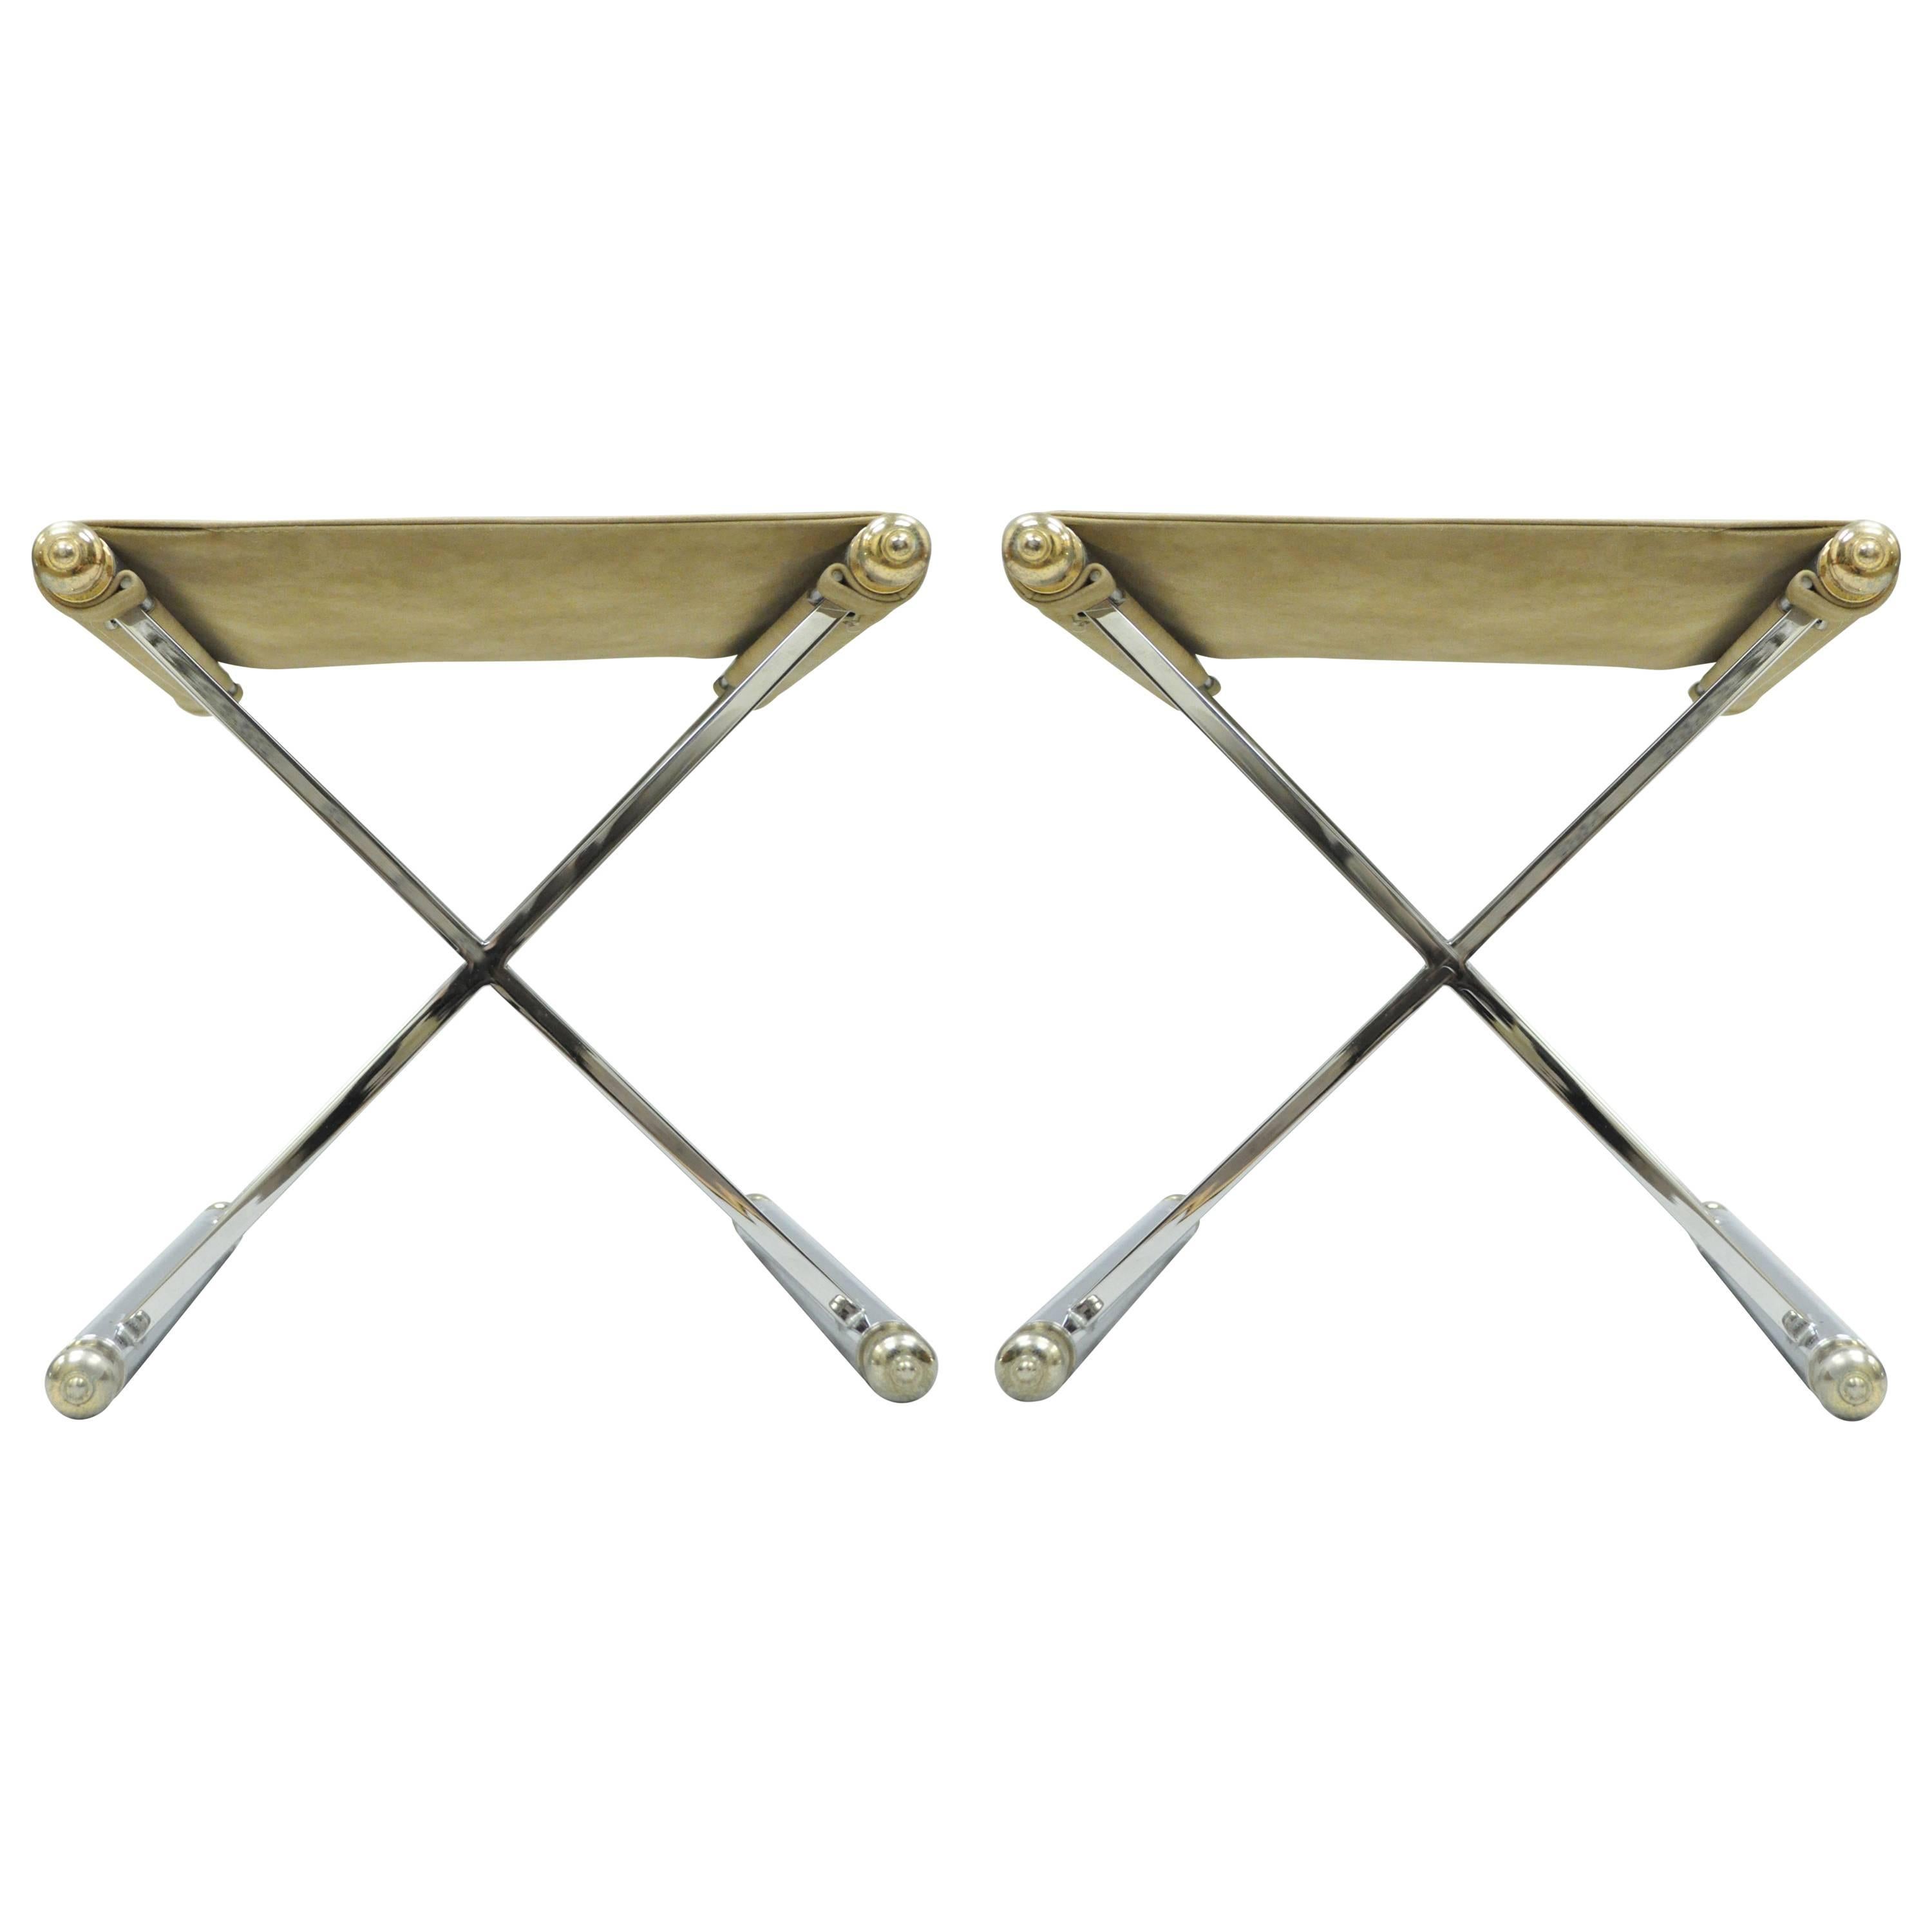 Pair of Hollywood Regency Maison Jansen Style X-Frame Chrome and Brass Stools